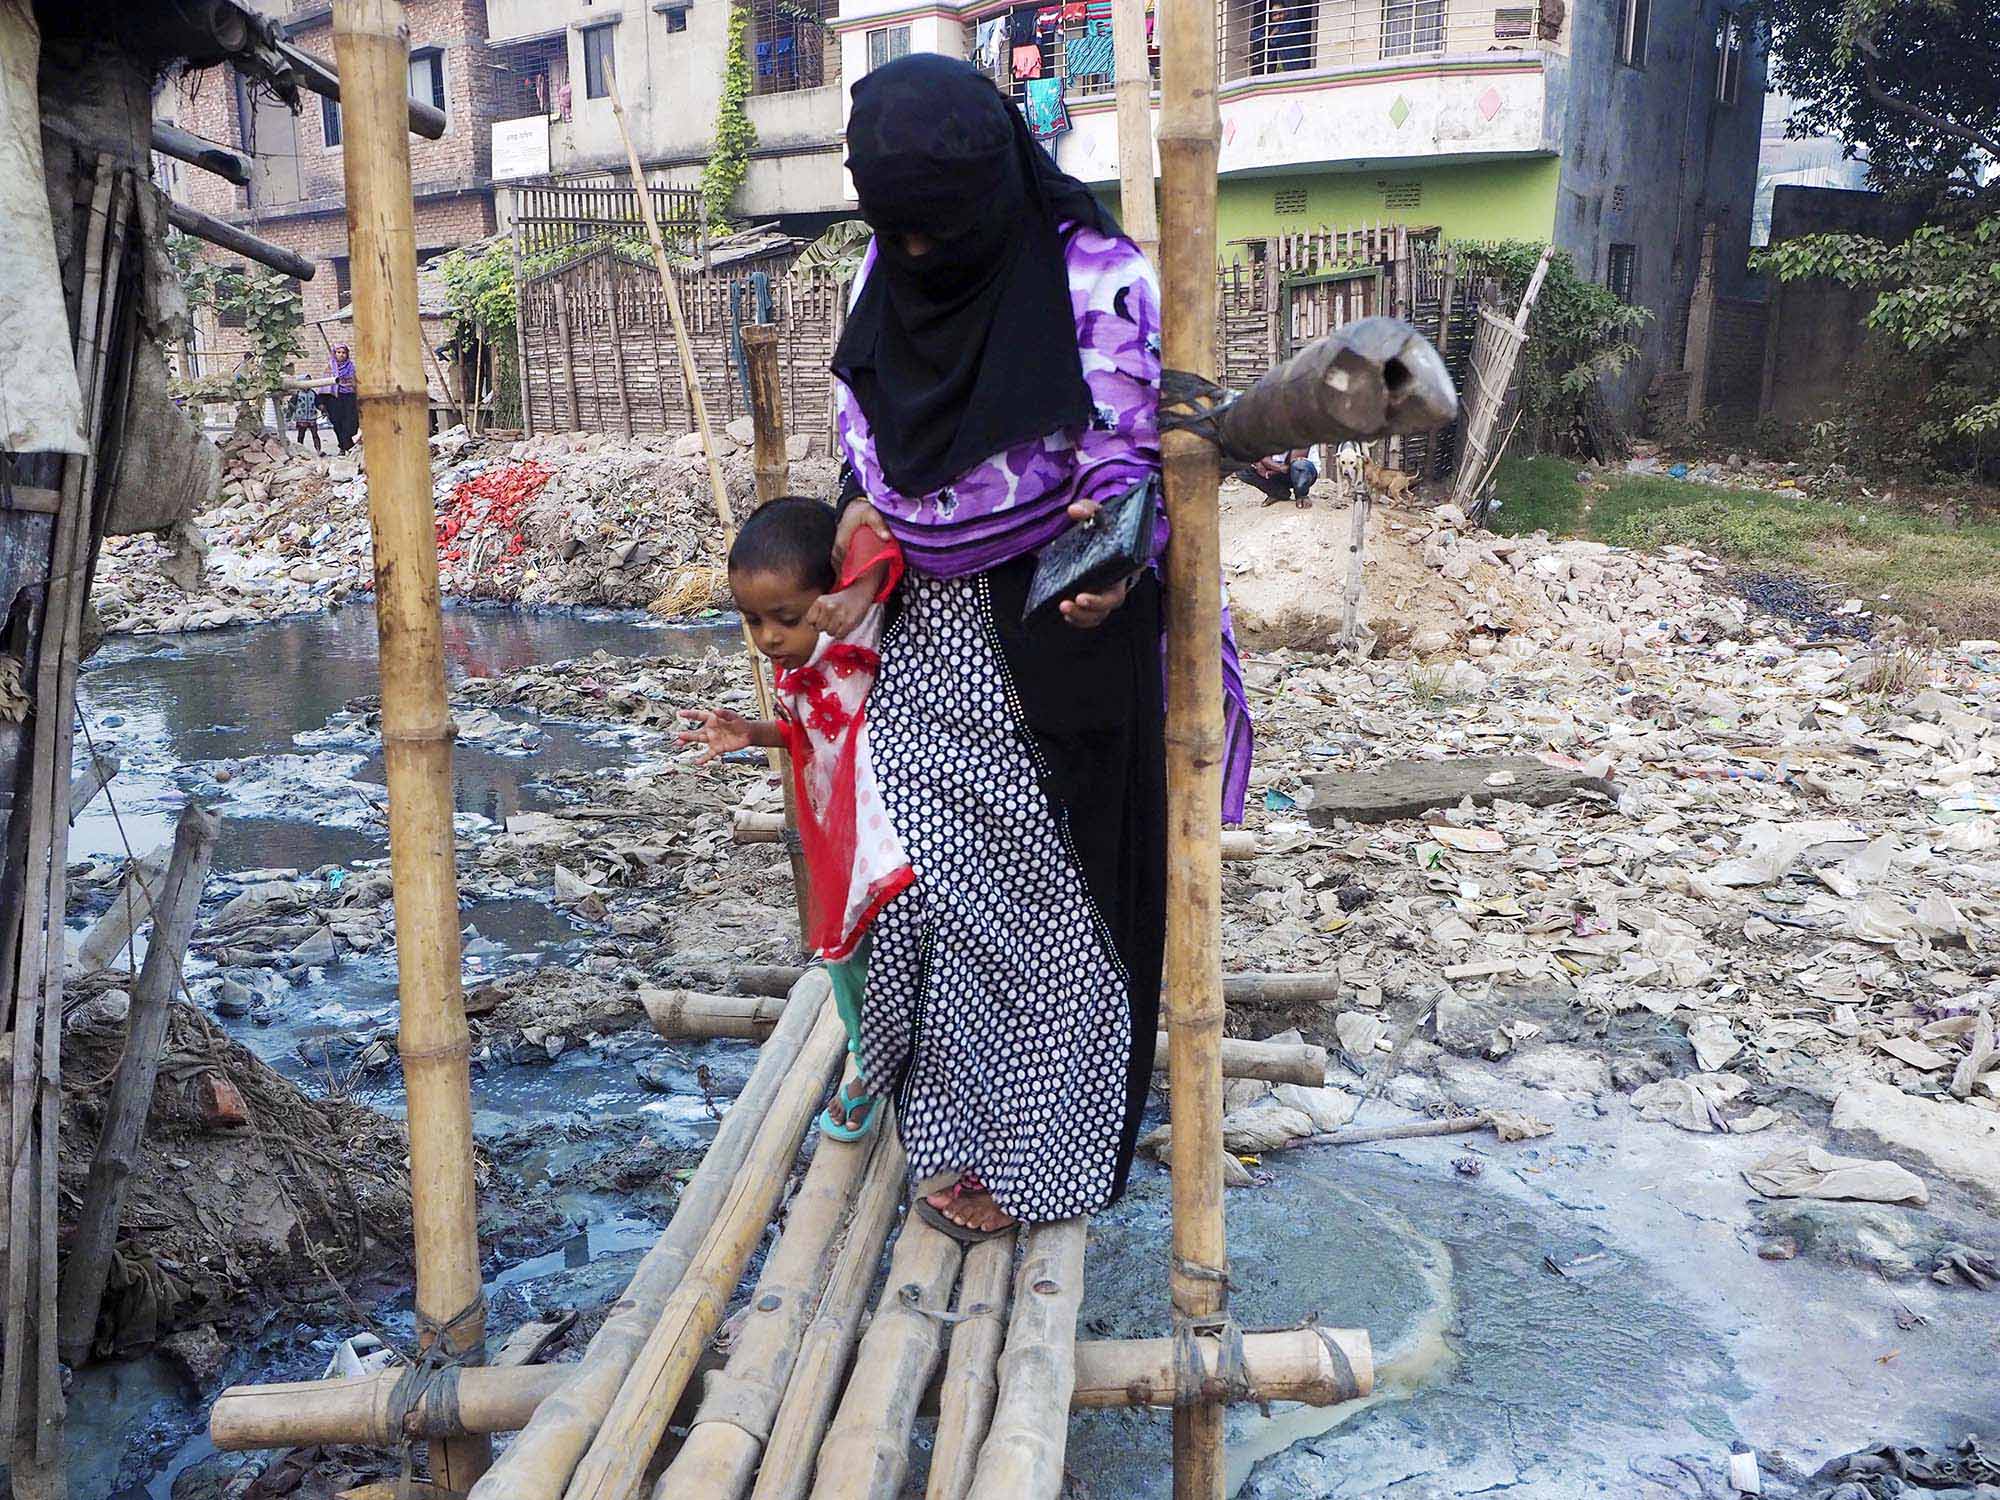 Residents of Hazaribagh, the tanning district in Dacha, make their way over a shaky bamboo bridge that spans a effluent canal carrying factory wast toward the Buriganga River. April 21st marks the third anniversary of the implosion of Bangladesh’s Rana Plaza garment factory complex,a tragedy that killed 1,129 and injured 2500 more young people sewing clothes for brands like Benetton, the Children’s Place and Wal-Mart. Rana Plaza illustrated how Bangladesh’s cheap prices came along with the country’s weak institutions, politically connected factory owners and a culture of impunity. But not every example of this impunity plays as well on TV. In 2012, Human Rights Watch’s “Toxic Tanneries,” revealed that none of the more than 250 leather tanneries in Old Dhaka’s Hazaribagh neighborhood treated the blue chromium-laced liquid that they used to transform rigid animal skins to into our supple leather. Even by the lax environmental standards of neighboring India, Hazaribagh is a disaster. In India, leather tanneries consistently flout pollution norms; in Bangladesh, they don’t even bother to try. In 2013, the same year as Rana Plaza, Hazaribagh made Pure Earth’s Worst Polluted List. In Hazaribagh, pollution is inescapable. Brown and grey liquid waste flows through a series of channels that criss-cross the neighborhood, carrying tannery waste into local creek with viscous water the color of liquid cement, choked with refuse, that oozes through the center of the neighborhood. One one side of the creek, stray dogs lounge on three foot piles of leather scraps. On the other side, you can glimpse the remnants of a glue factory that cook down various animal parts to make glue. The smell, equal parts chemicals, slaughterhouse and desperation, assaults you. This caustic blue-grey waste flows directly into the Buriganga River, where chromium and lead exceed permissible levels by 105 and 80 times, respectively. An estimated 180, 000 people in the area now suf